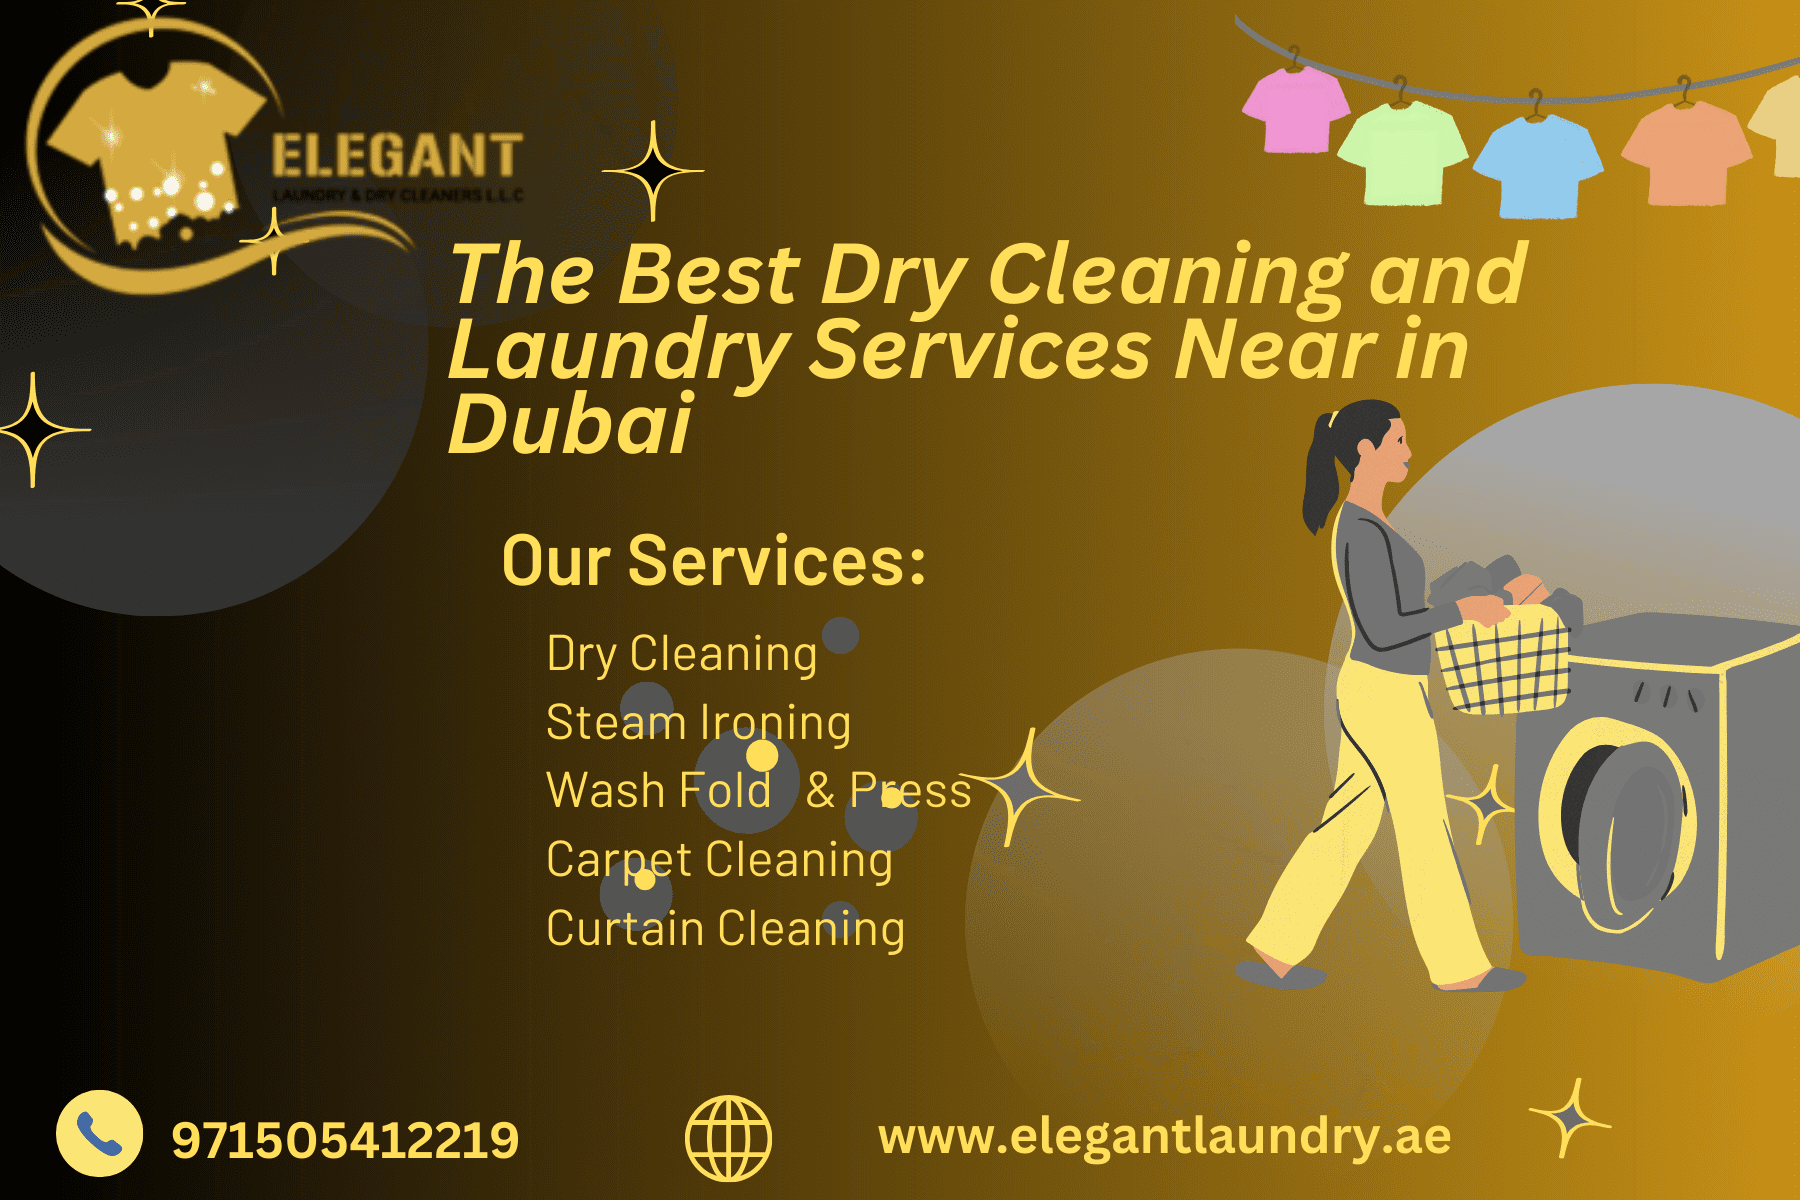 The Best Dry Cleaning and Laundry Services Near in Dubai  - Dubai Professional Services